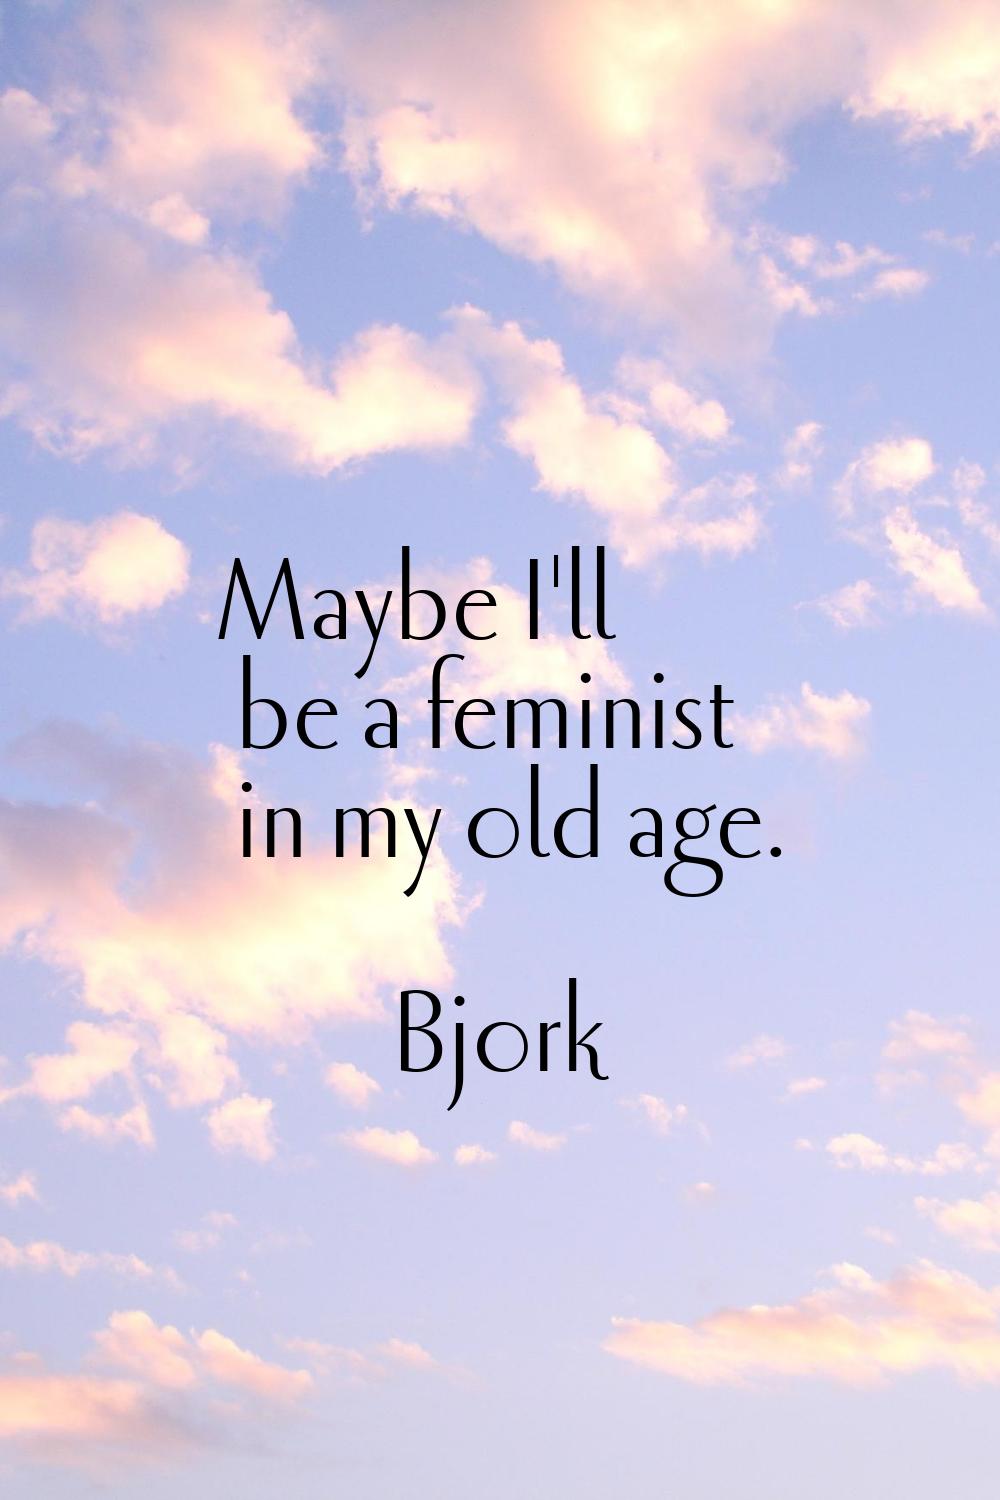 Maybe I'll be a feminist in my old age.